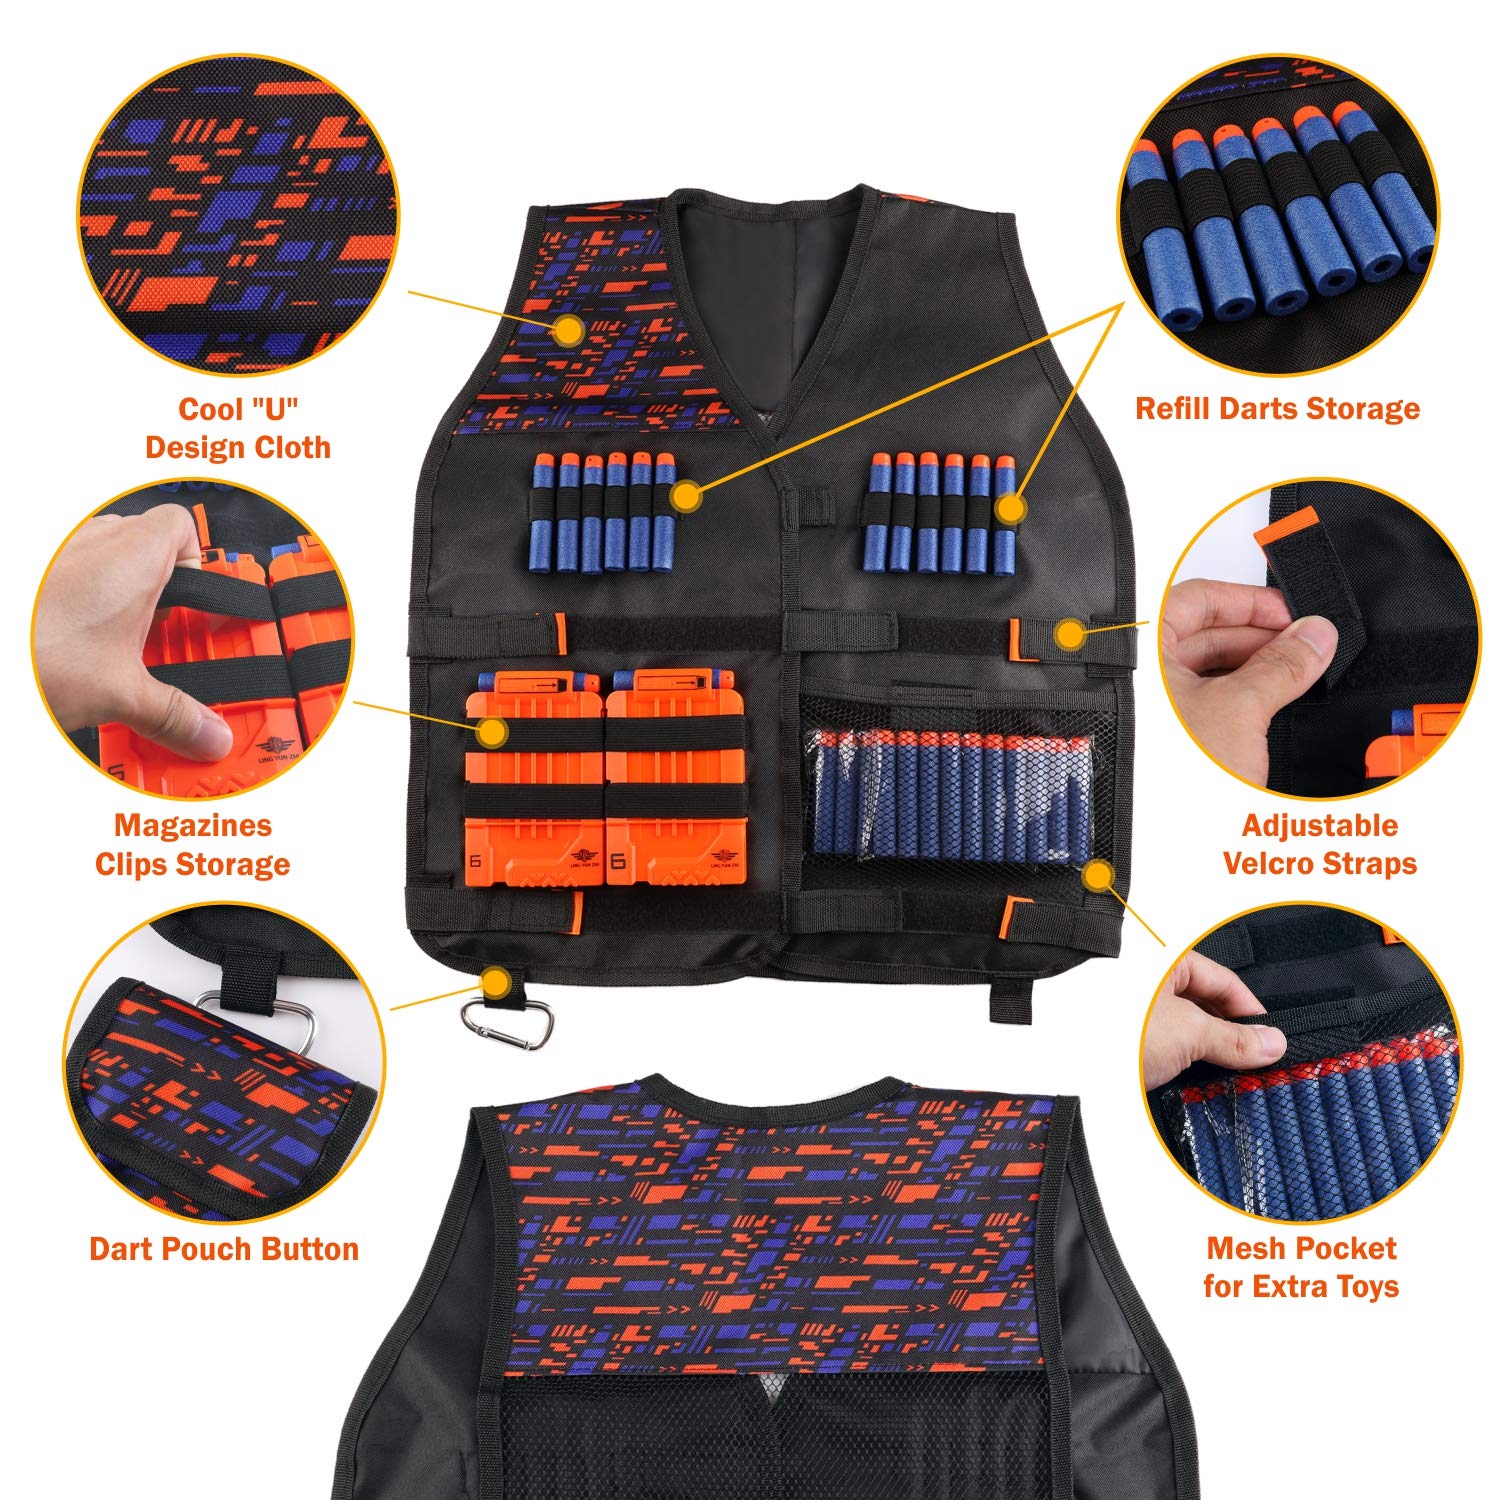 Kids Tactical Vest Kit for Nerf Guns N-Strike Elite Series with Refill Darts Dart Pouch, Reload Clip Tactical Mask Wrist Band and Protective Glasses for kids Boys & girls